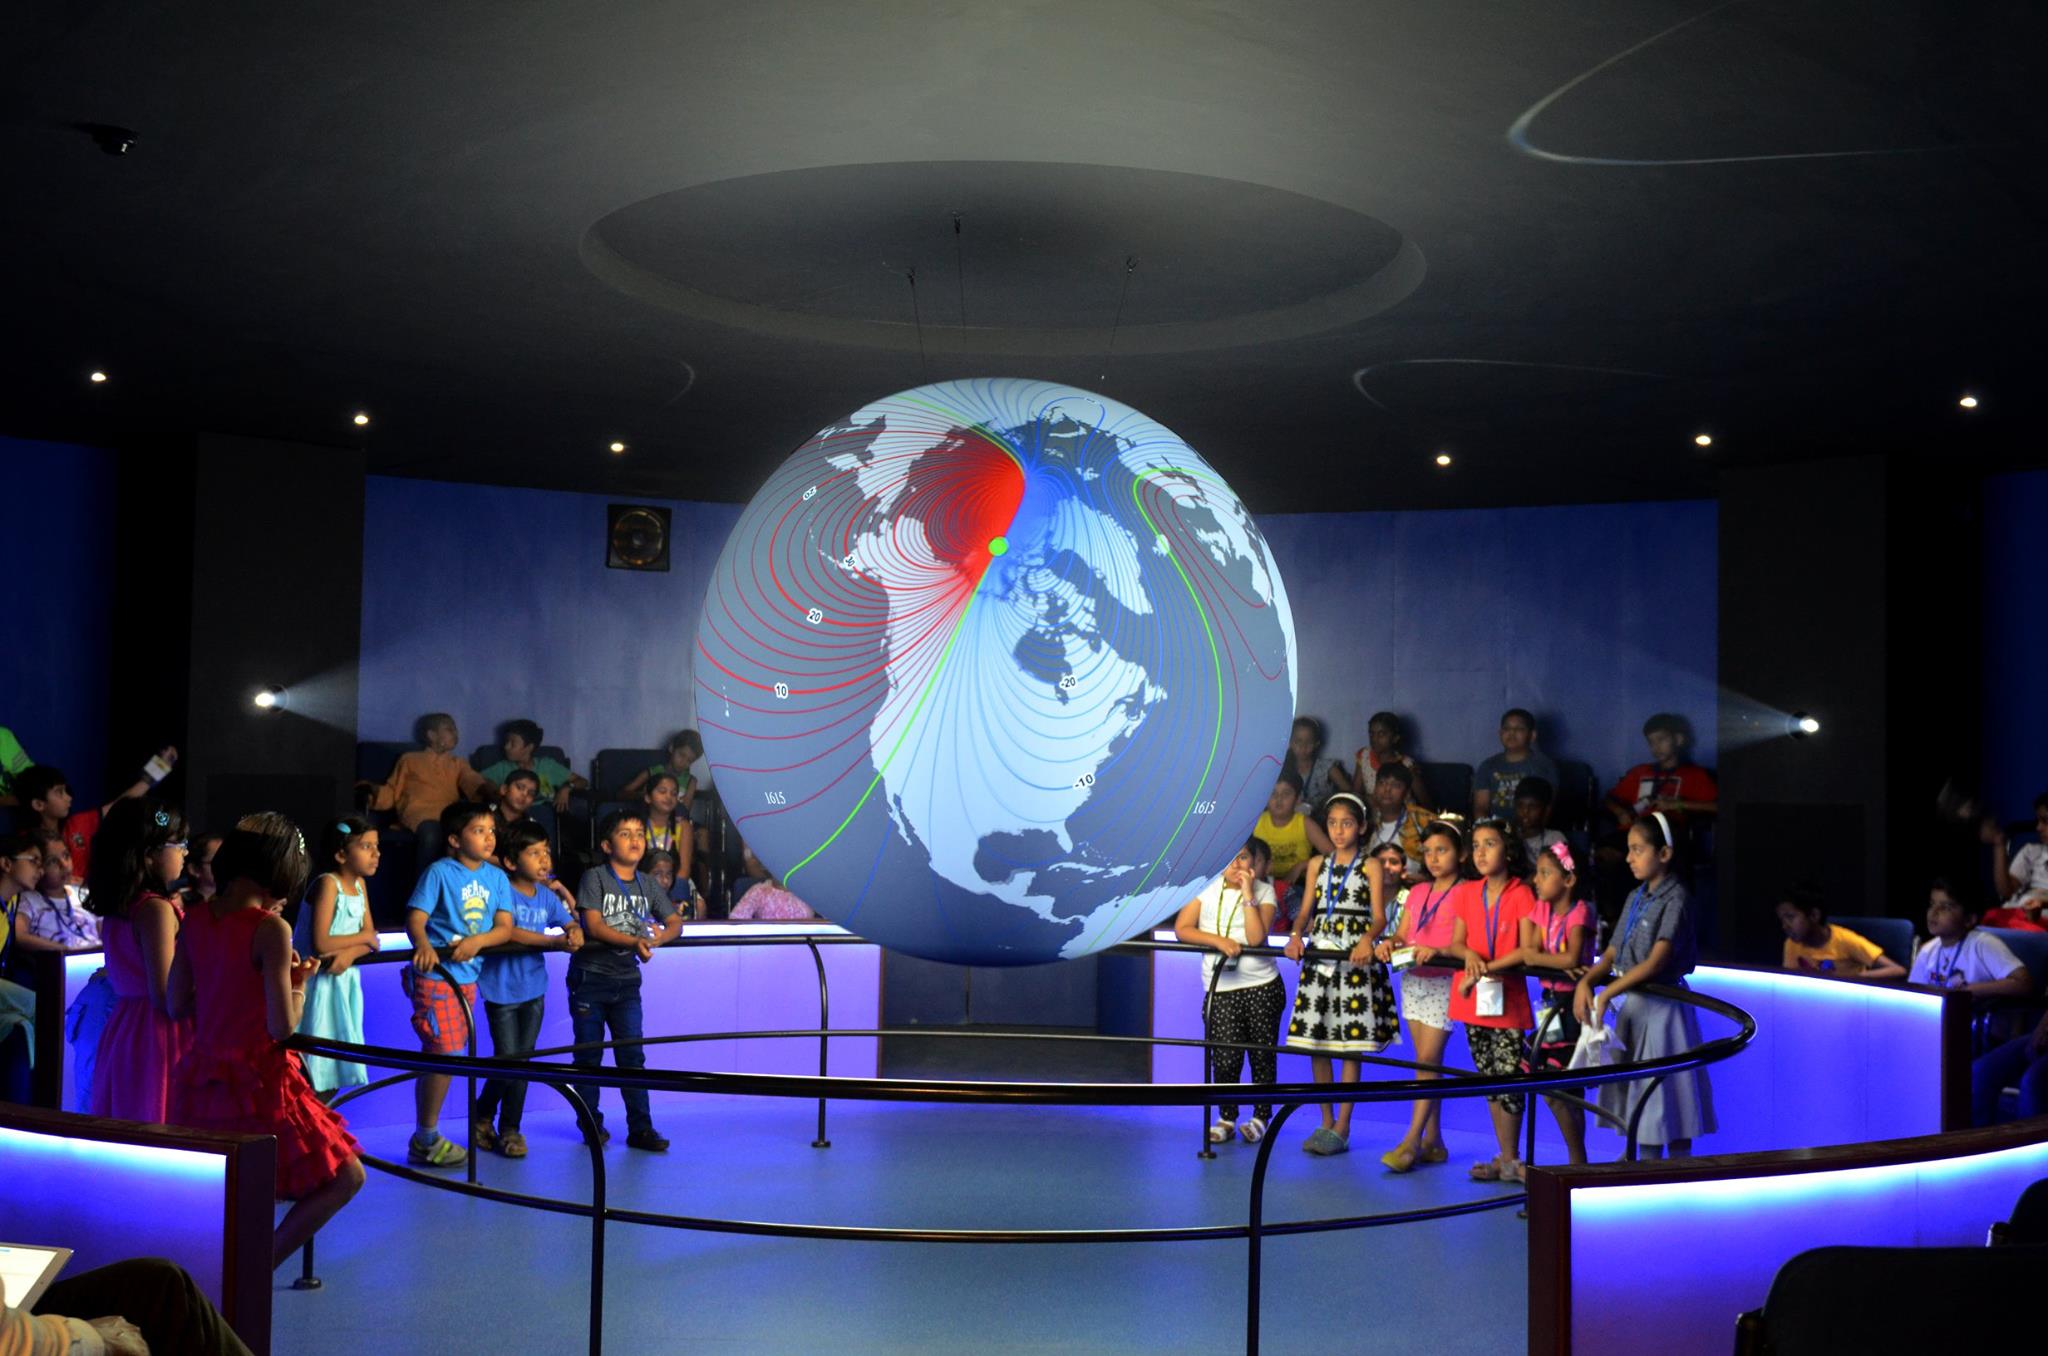 A group of children stand around a railing watching Science On a Sphere in a darkened theater, more children are seated in chairs behind them. Science On a Sphere displays red and blue lines indicating Earth's magnetic declination